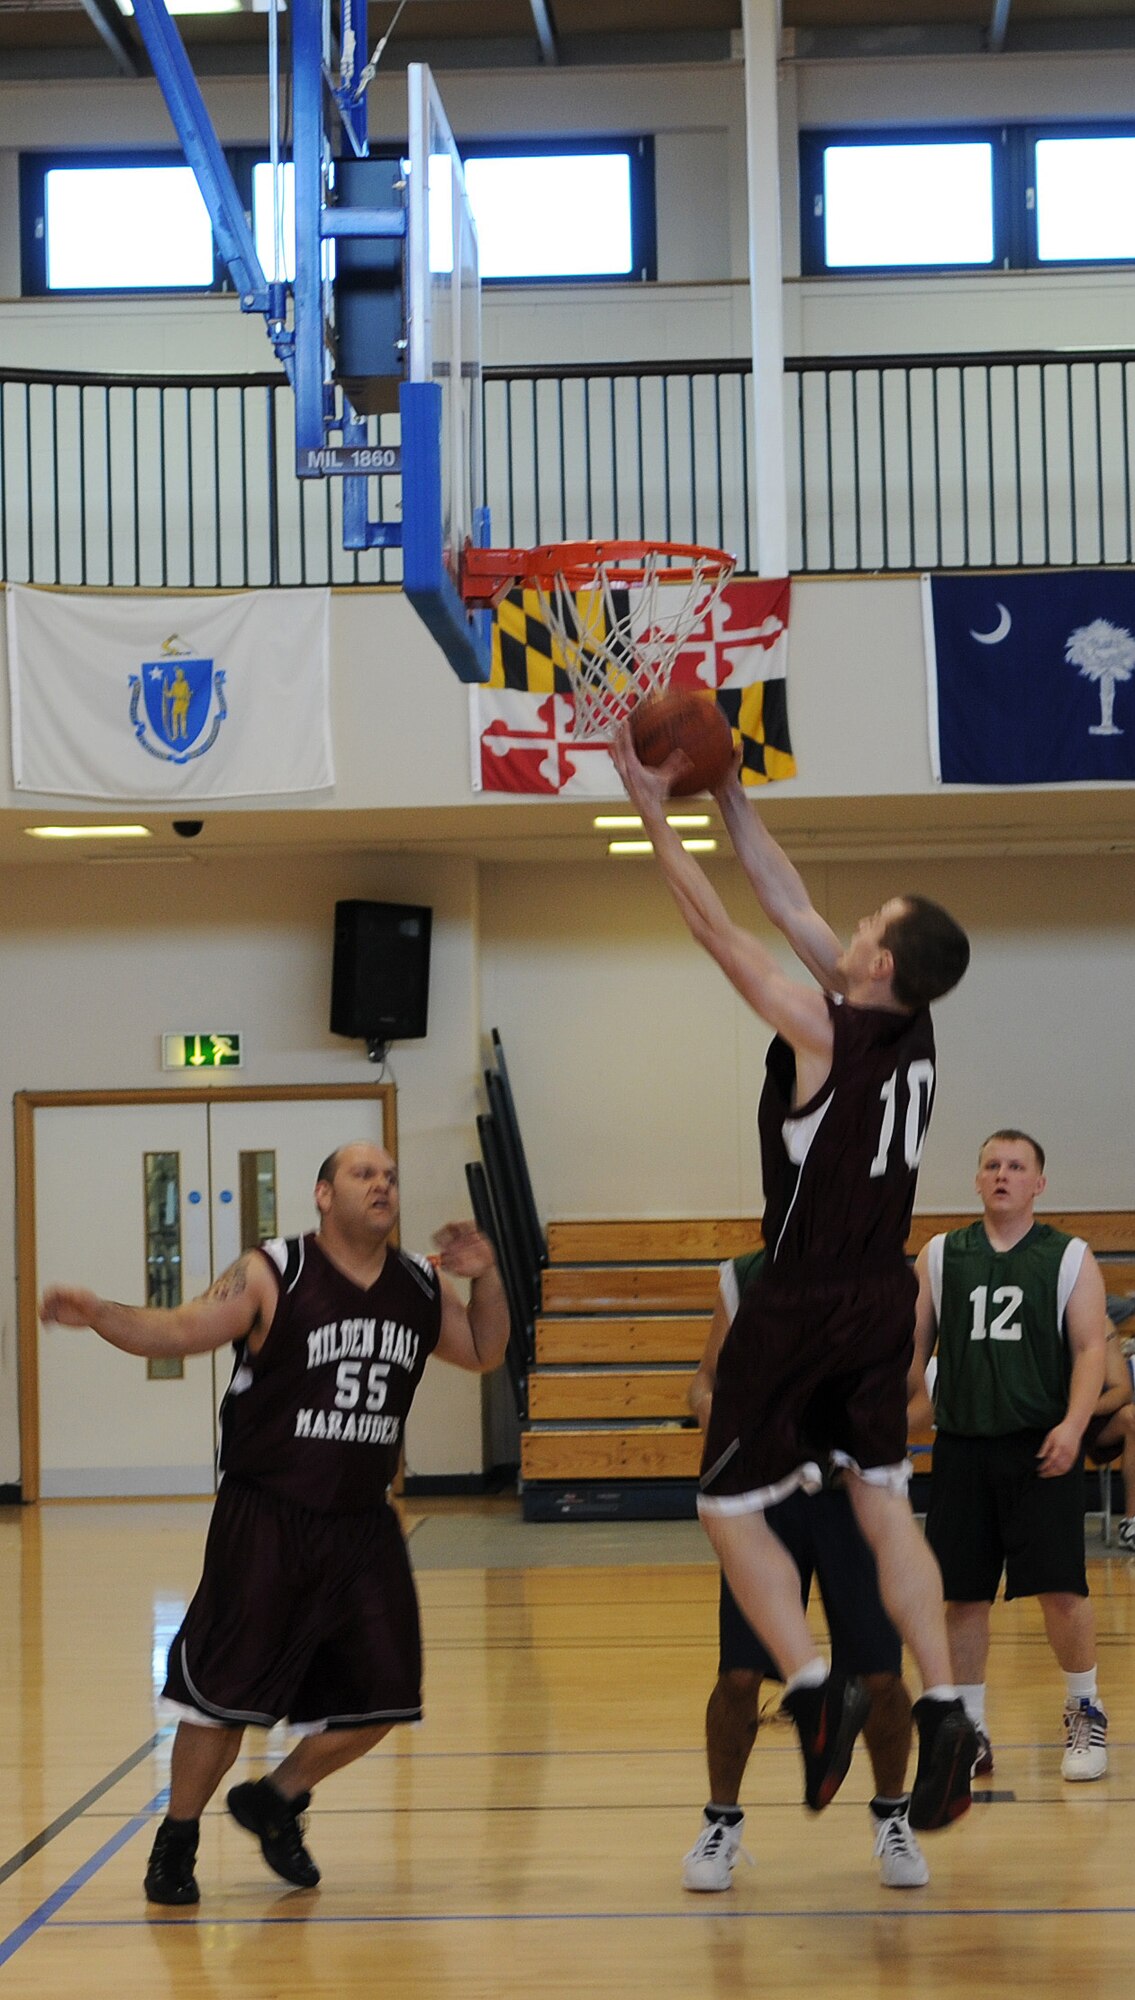 RAF MILDENHALL, England -- Kalen Strunk, RAF Mildenhall Team 1 player, lifts a layup in an attempt to increase the point difference against RAF Lakenheath Team 2 in the opening 2010 U.S. Air Forces in Europe Small Unit/Intramural Basketball Championship game March 4 at the Hardstand Fitness Center. The RAF Mildenhall Marauders started the tournament with a 53-38 final score. The championship games last through March 7 at the Hardstand. (U.S. Air Force photo/Staff Sgt. Thomas Trower)